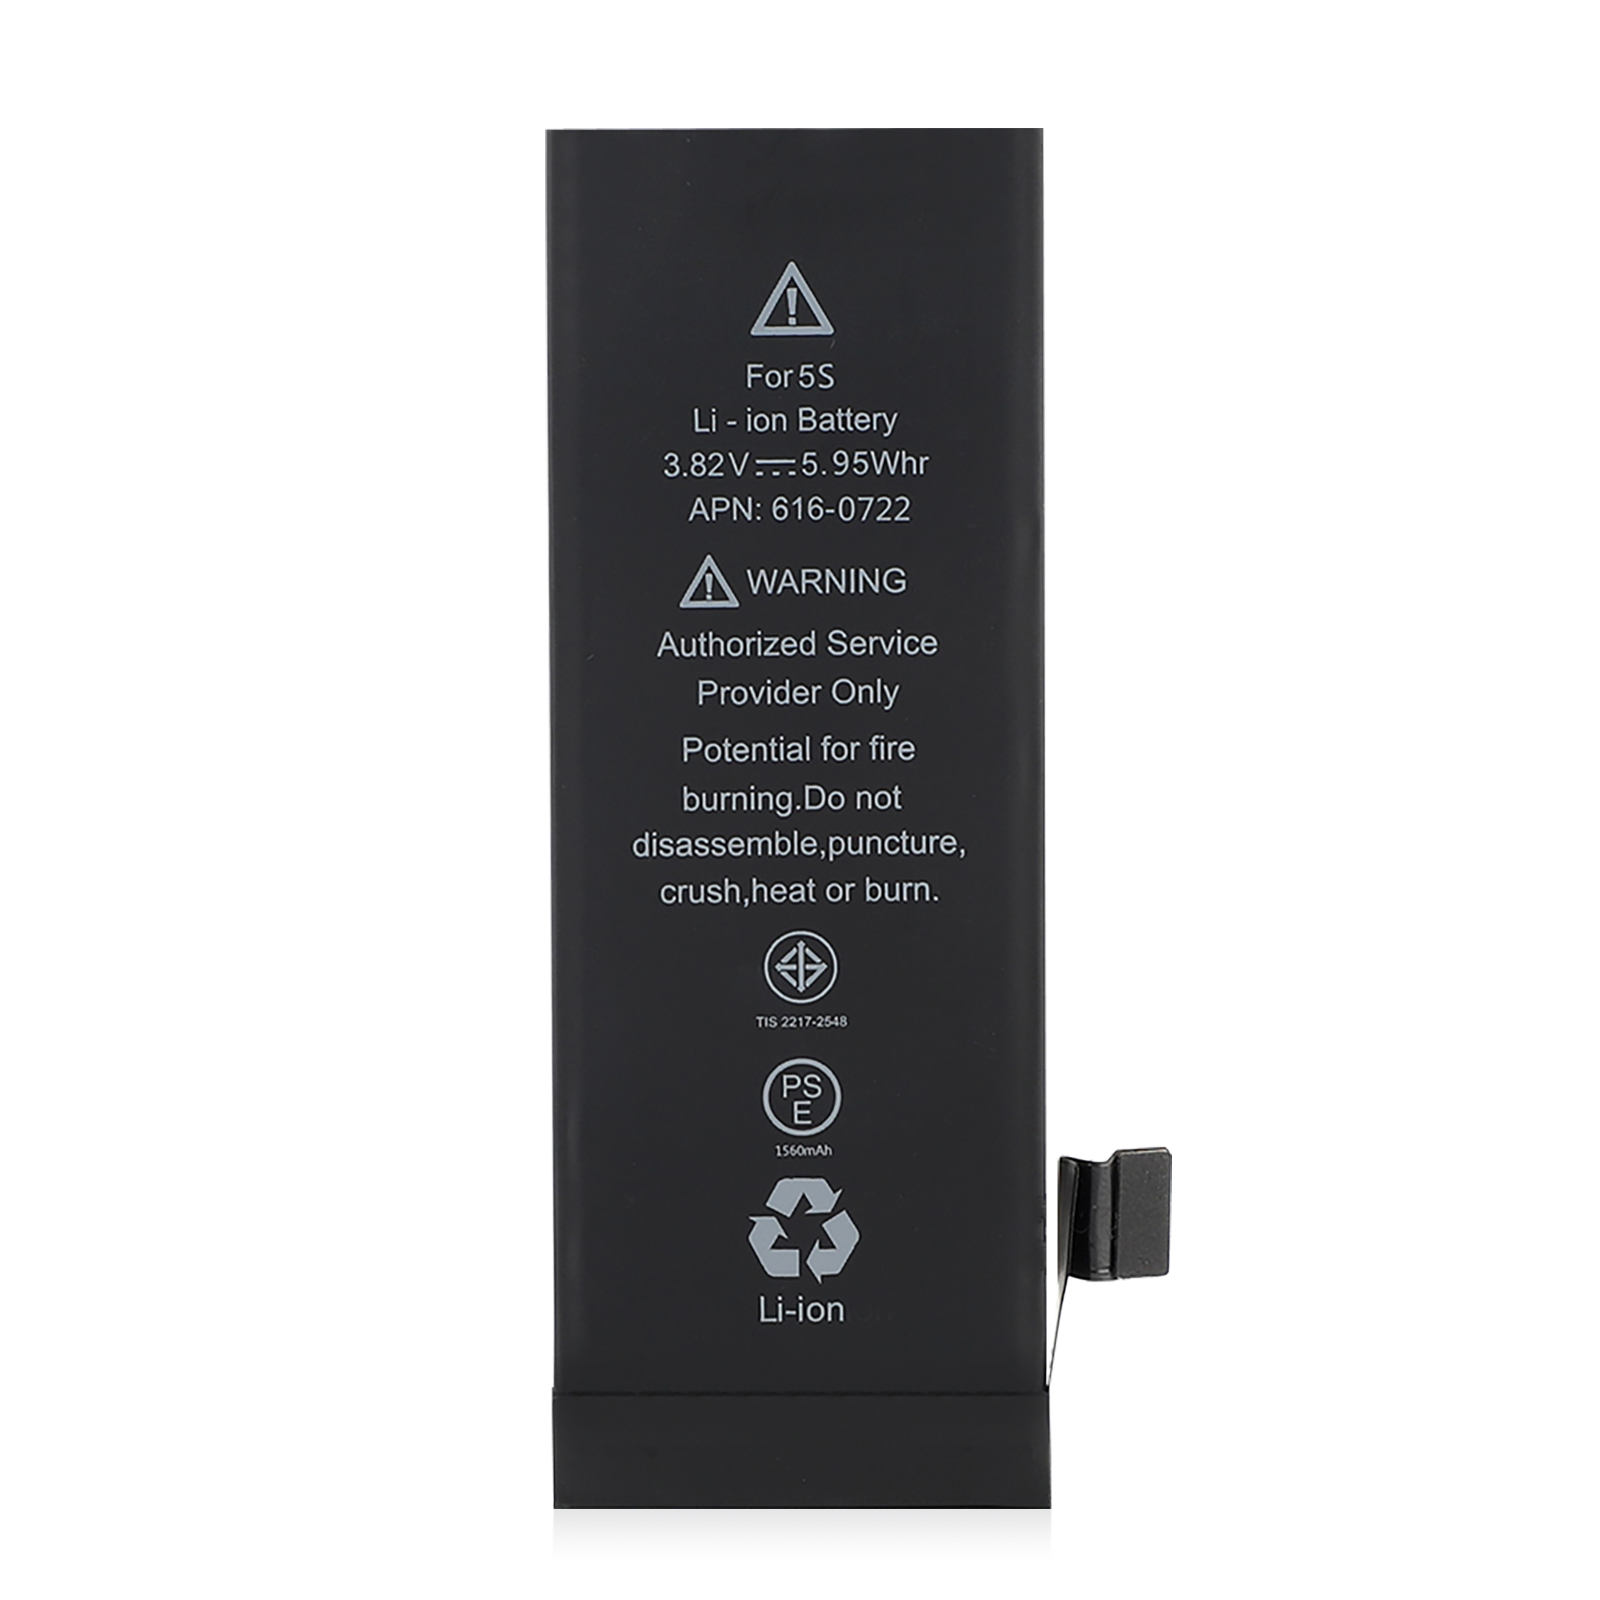 New 1560mAh replacement external Li-ion Battery for iP 5S/5C